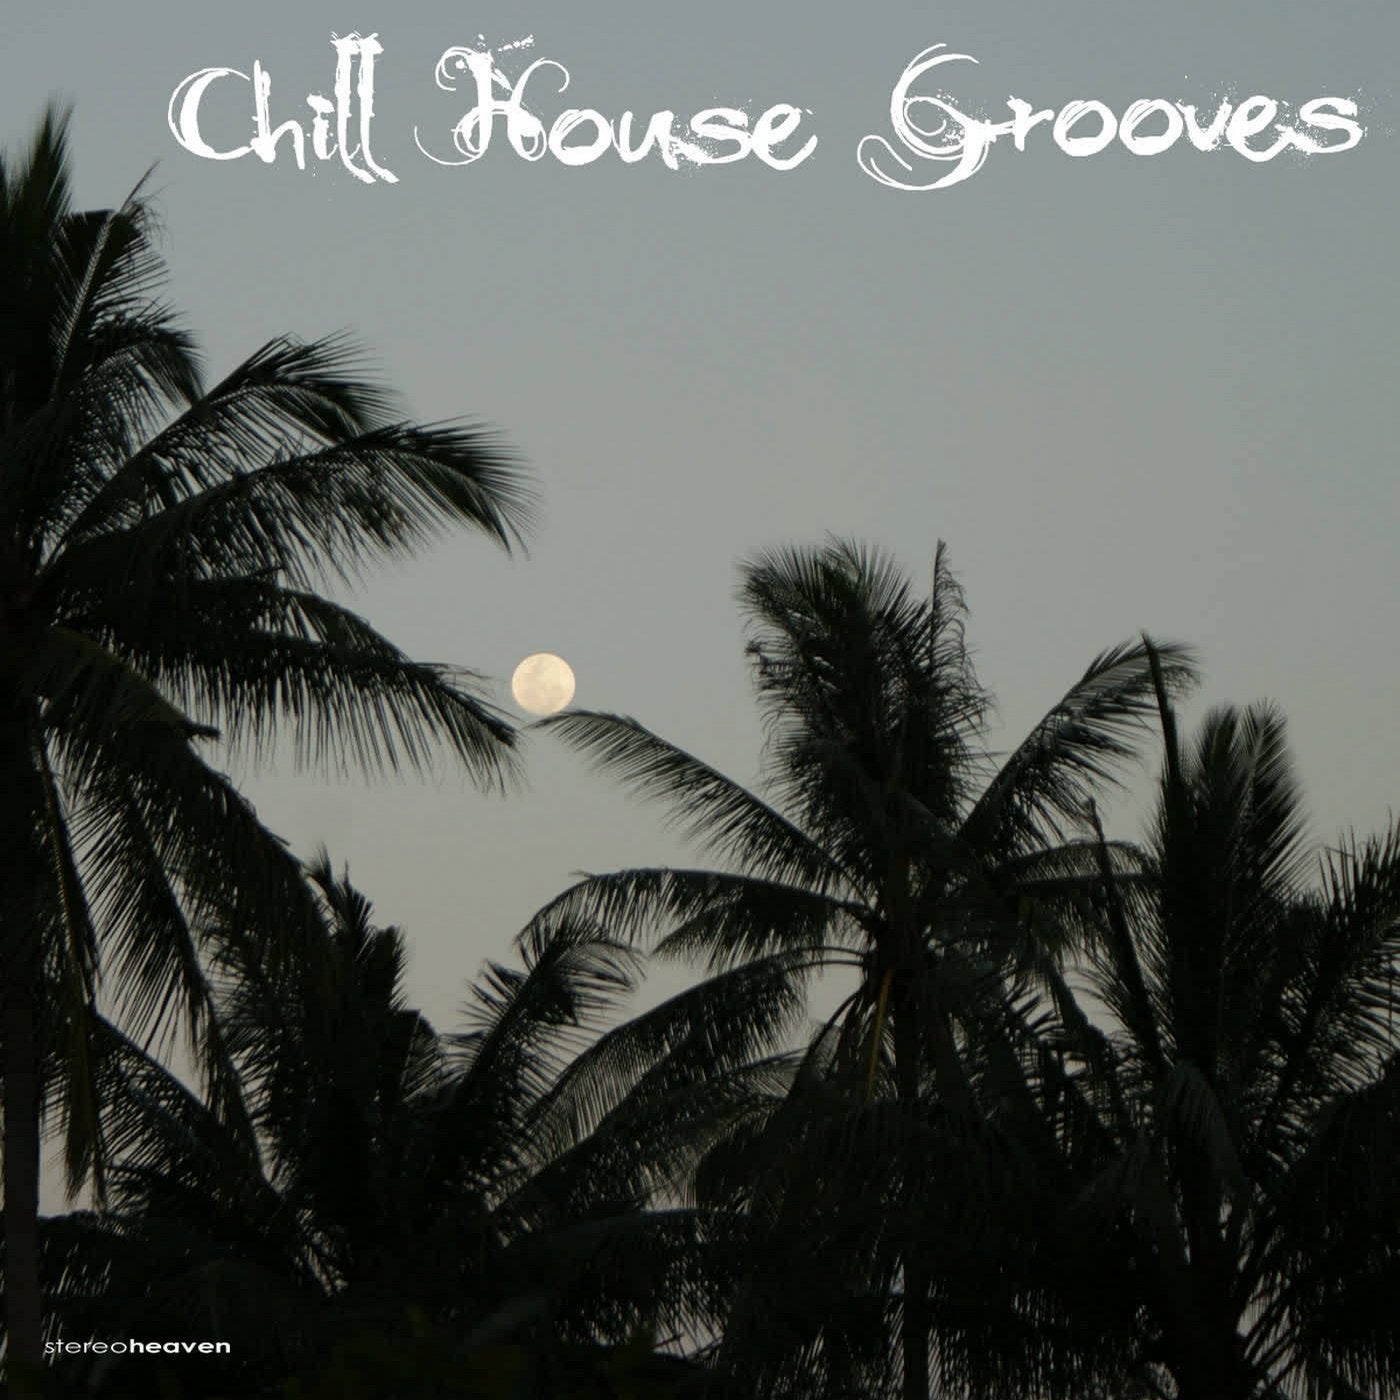 Chill House Grooves